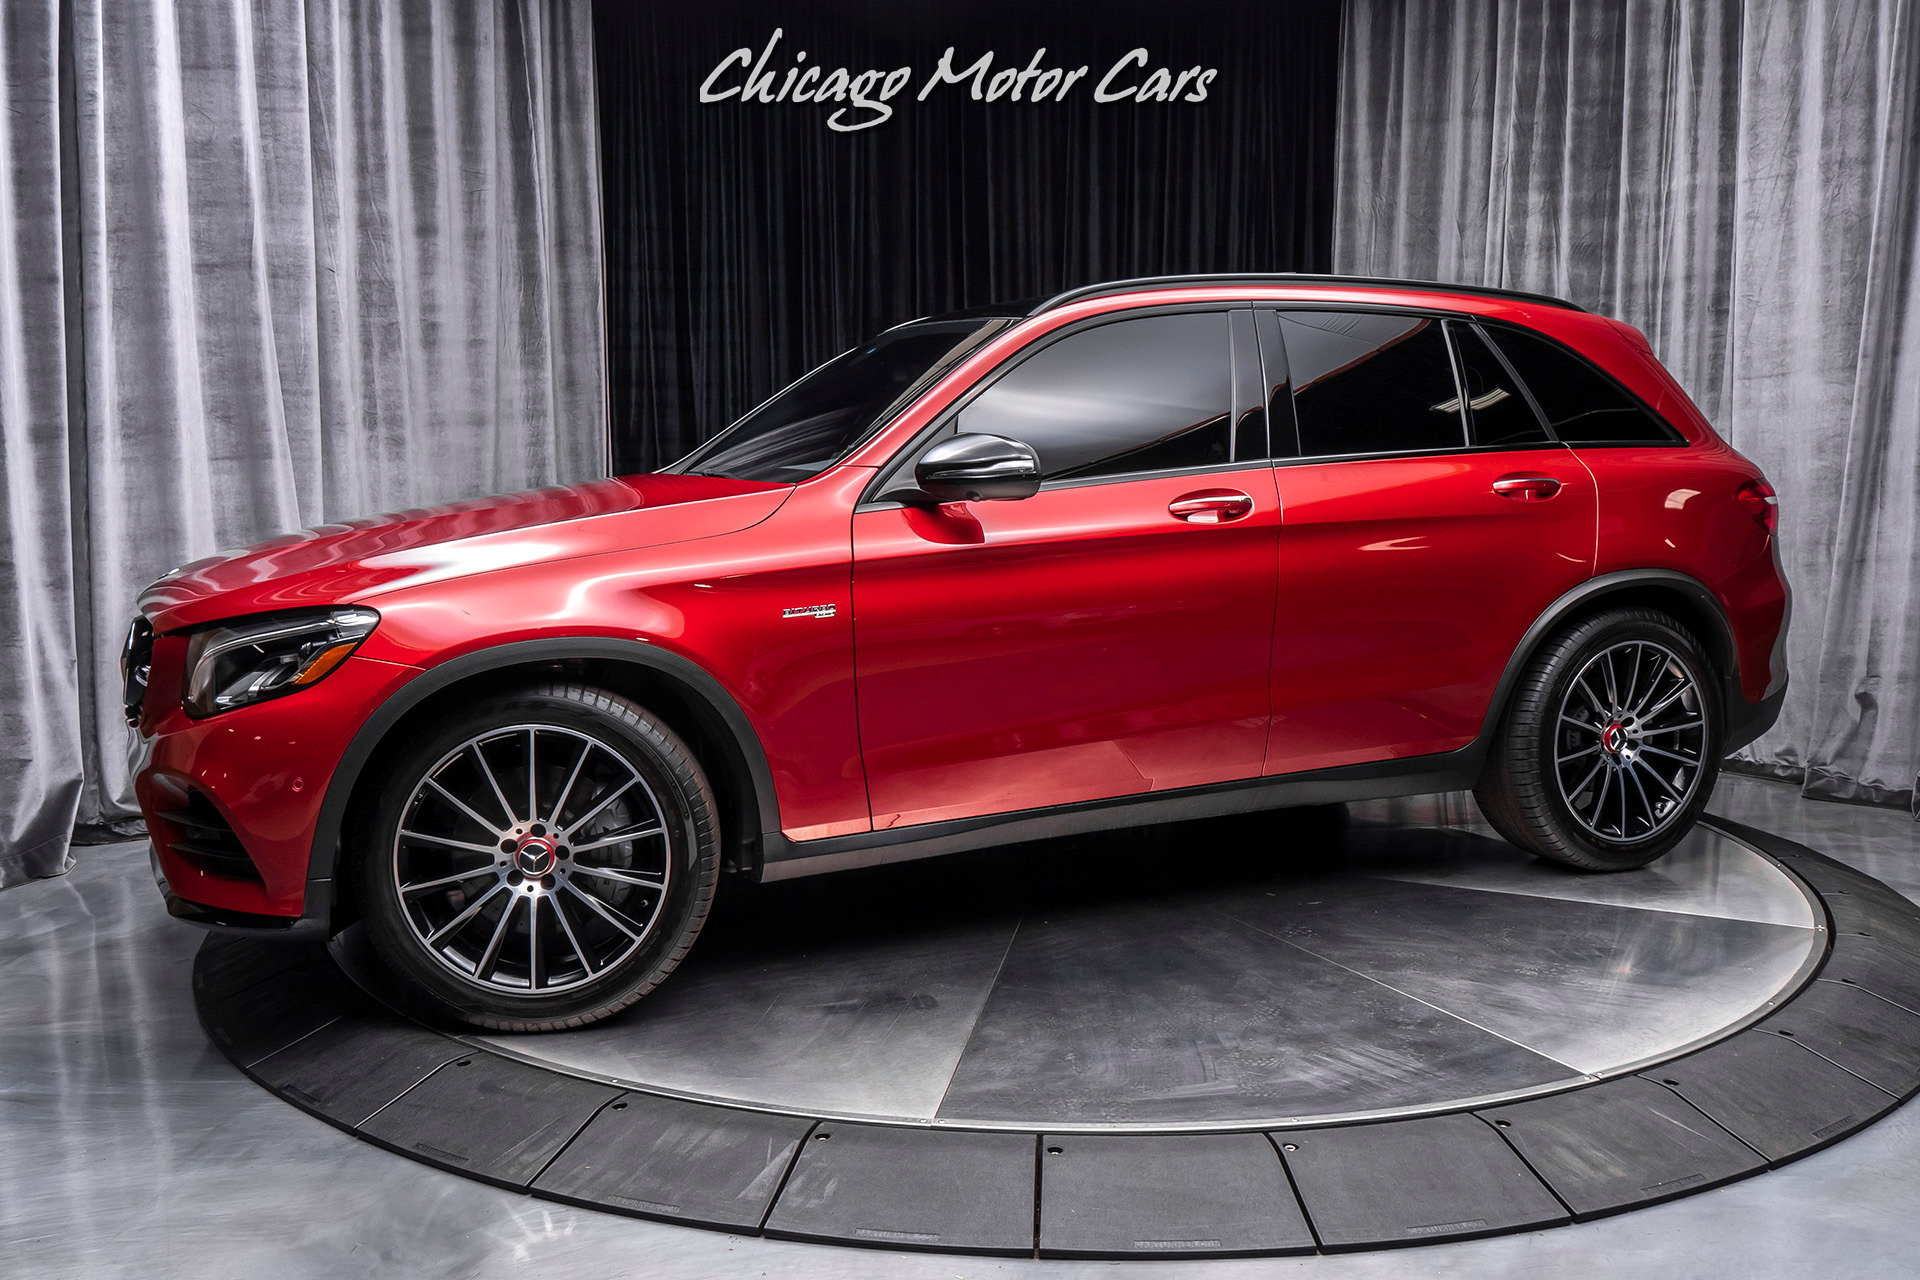 Used 2018 Mercedes-Benz GLC 43 AMG SUV MULTIMEDIA PACKAGE! PARK ASSIST! For  Sale ($47,800) | Chicago Motor Cars Stock #16104